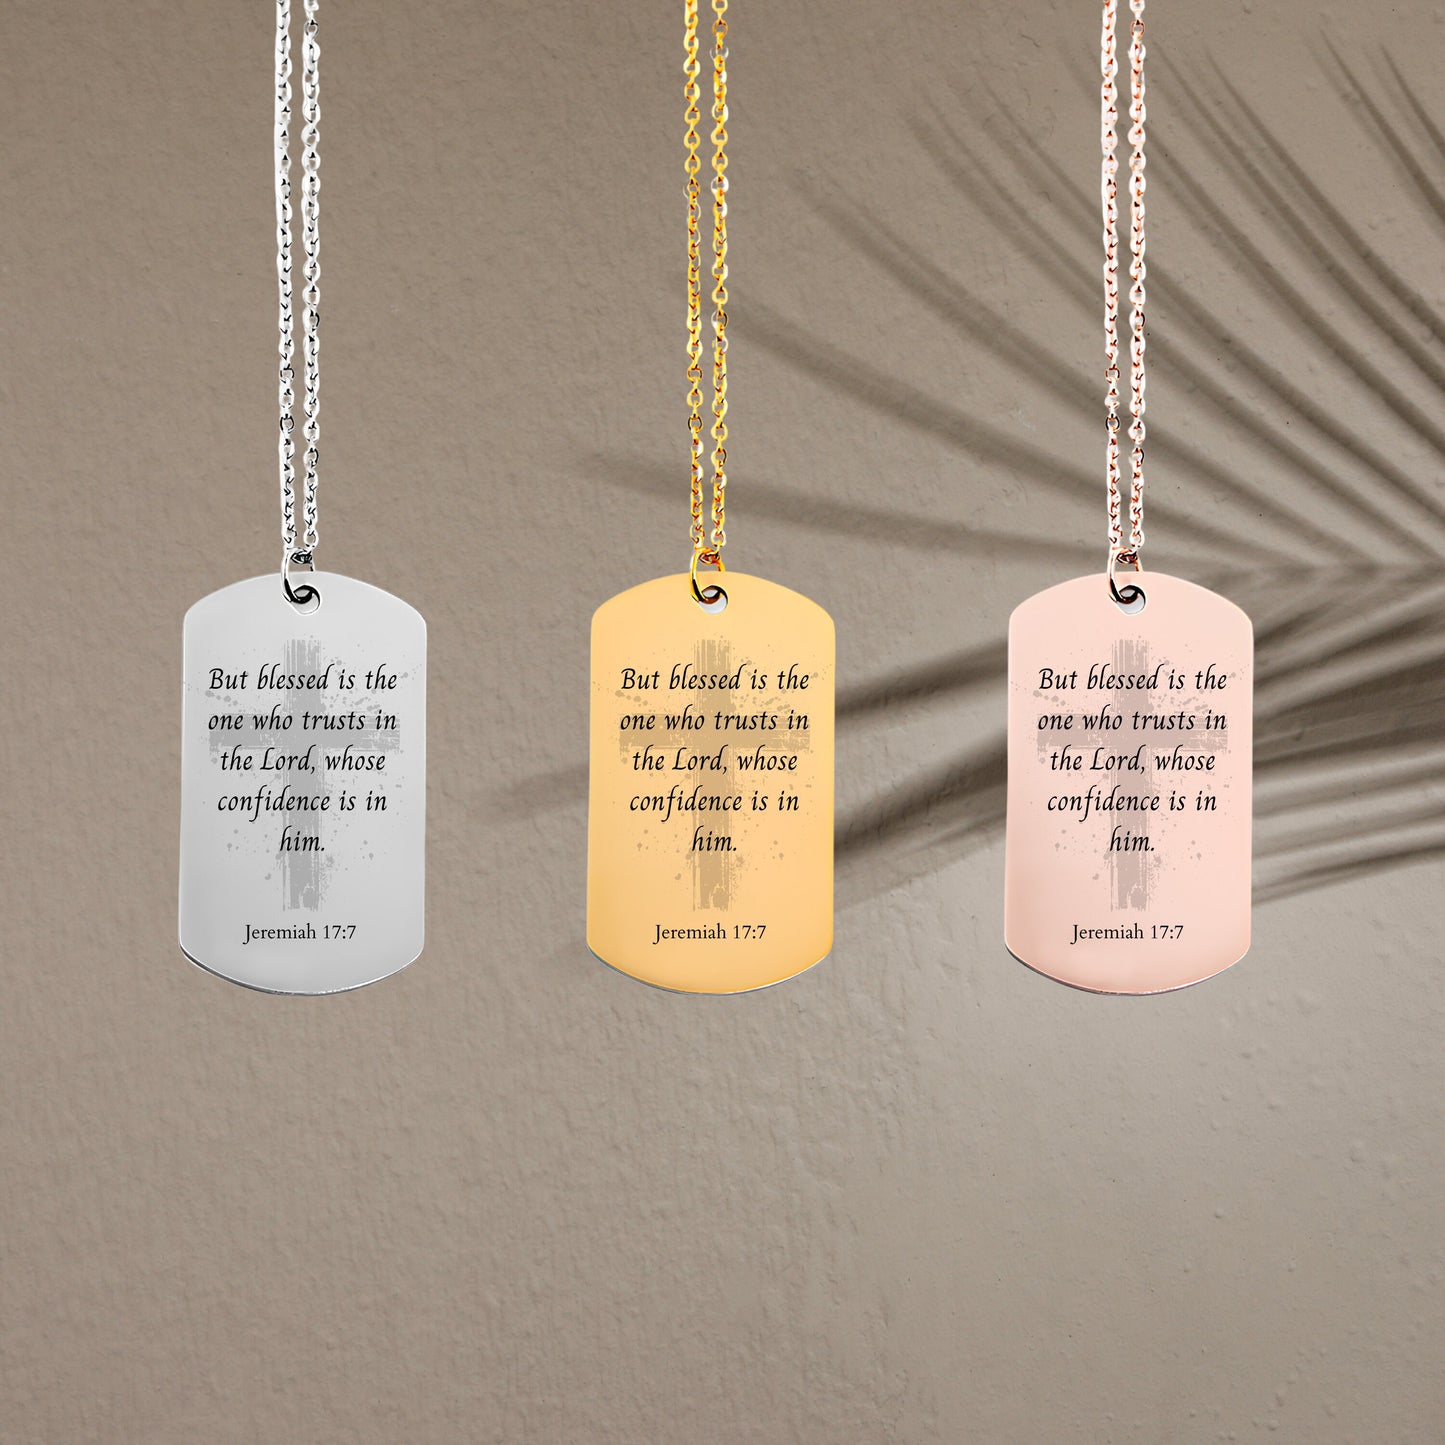 Jeremiah 17 7quote necklace - Personalizable Jewelry